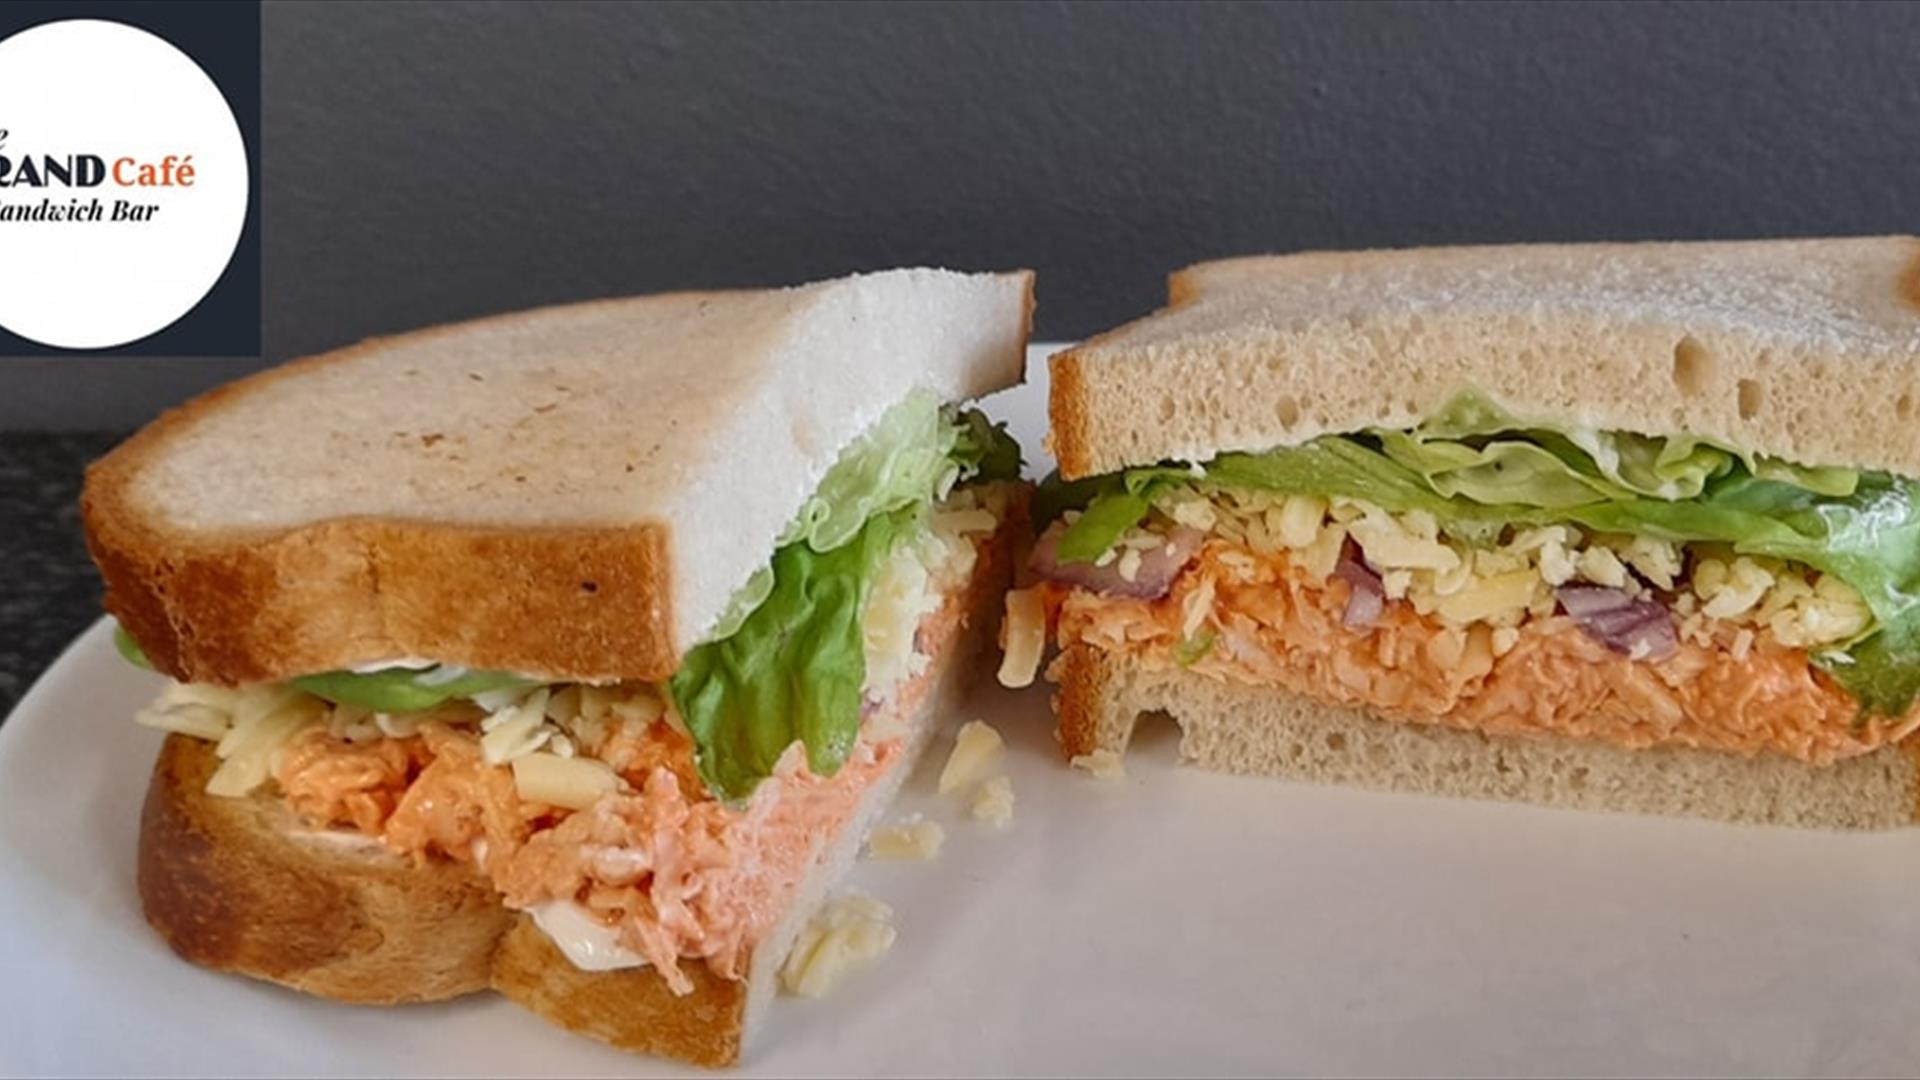 Image shows two sandwiches with a variety of fillings.